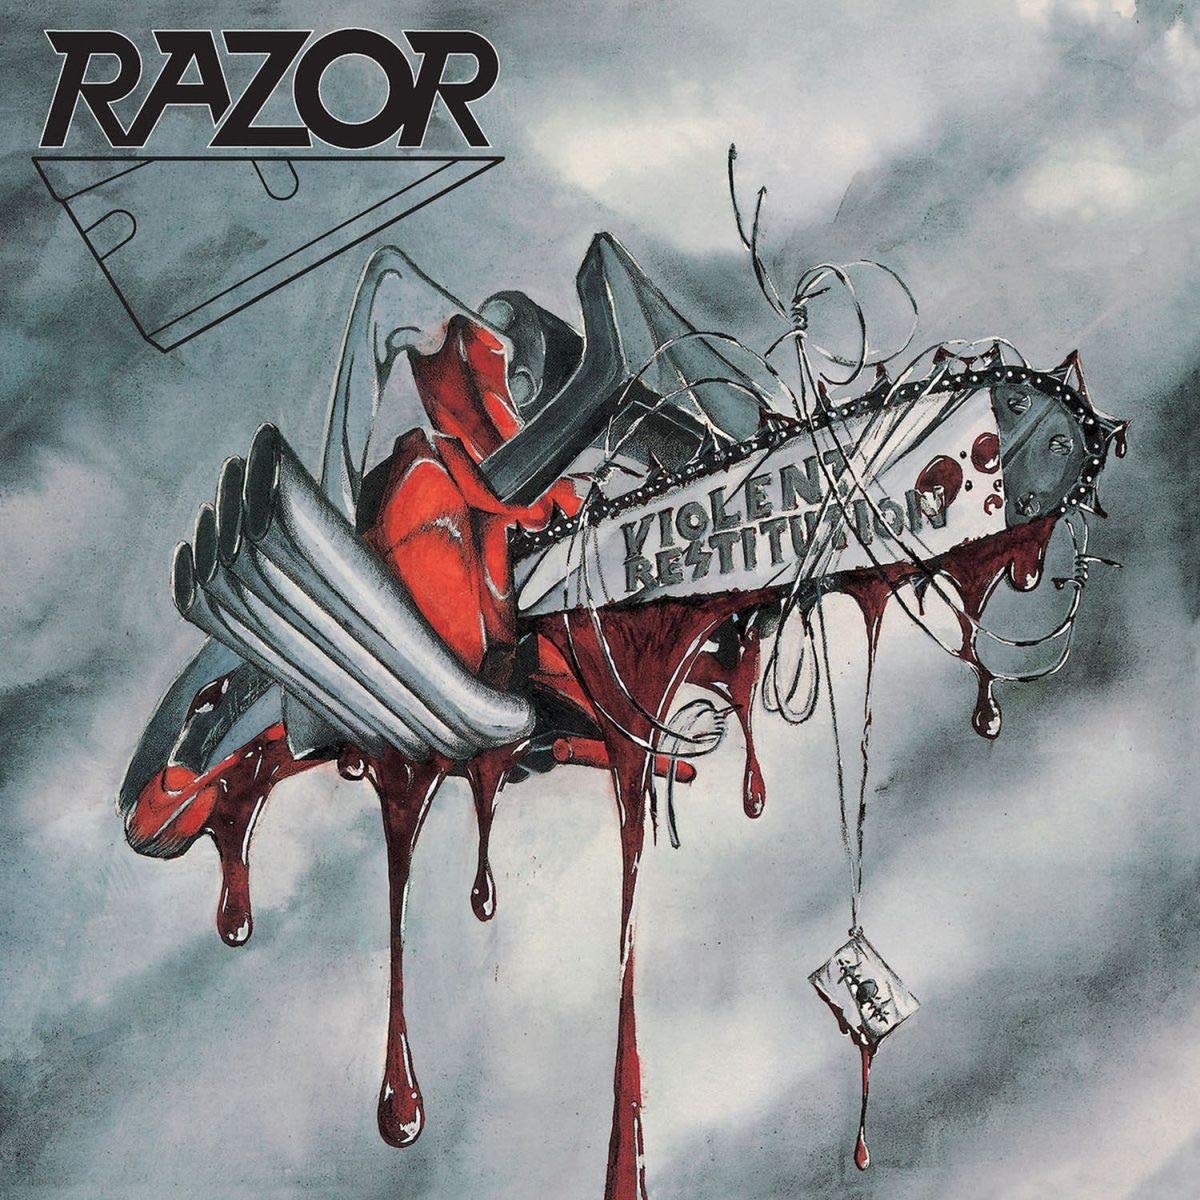 review-of-the-album-violent-restitution-by-razor